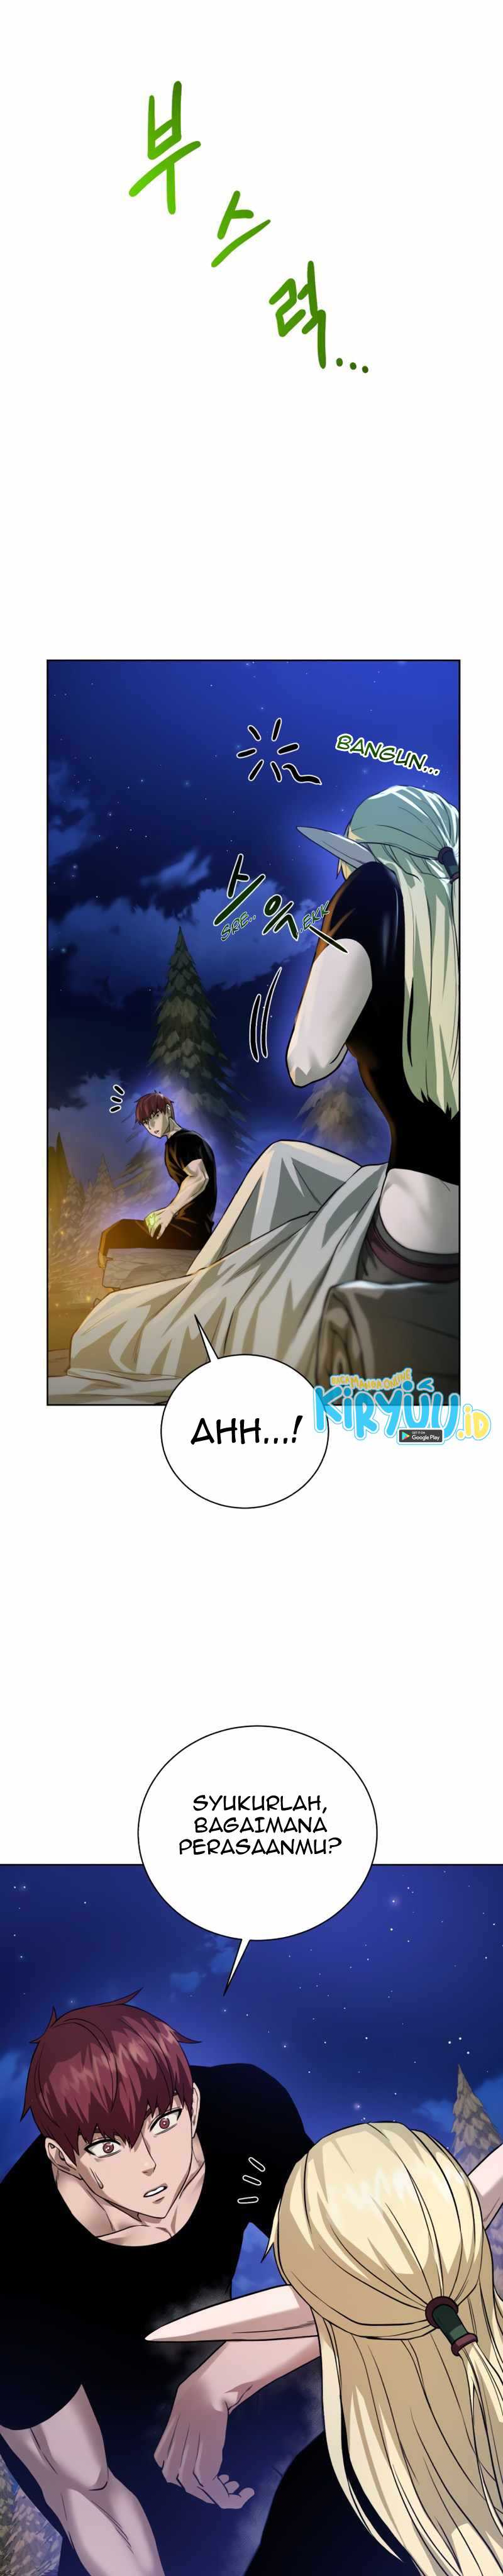 dungeons-artifacts Chapter chapter-57